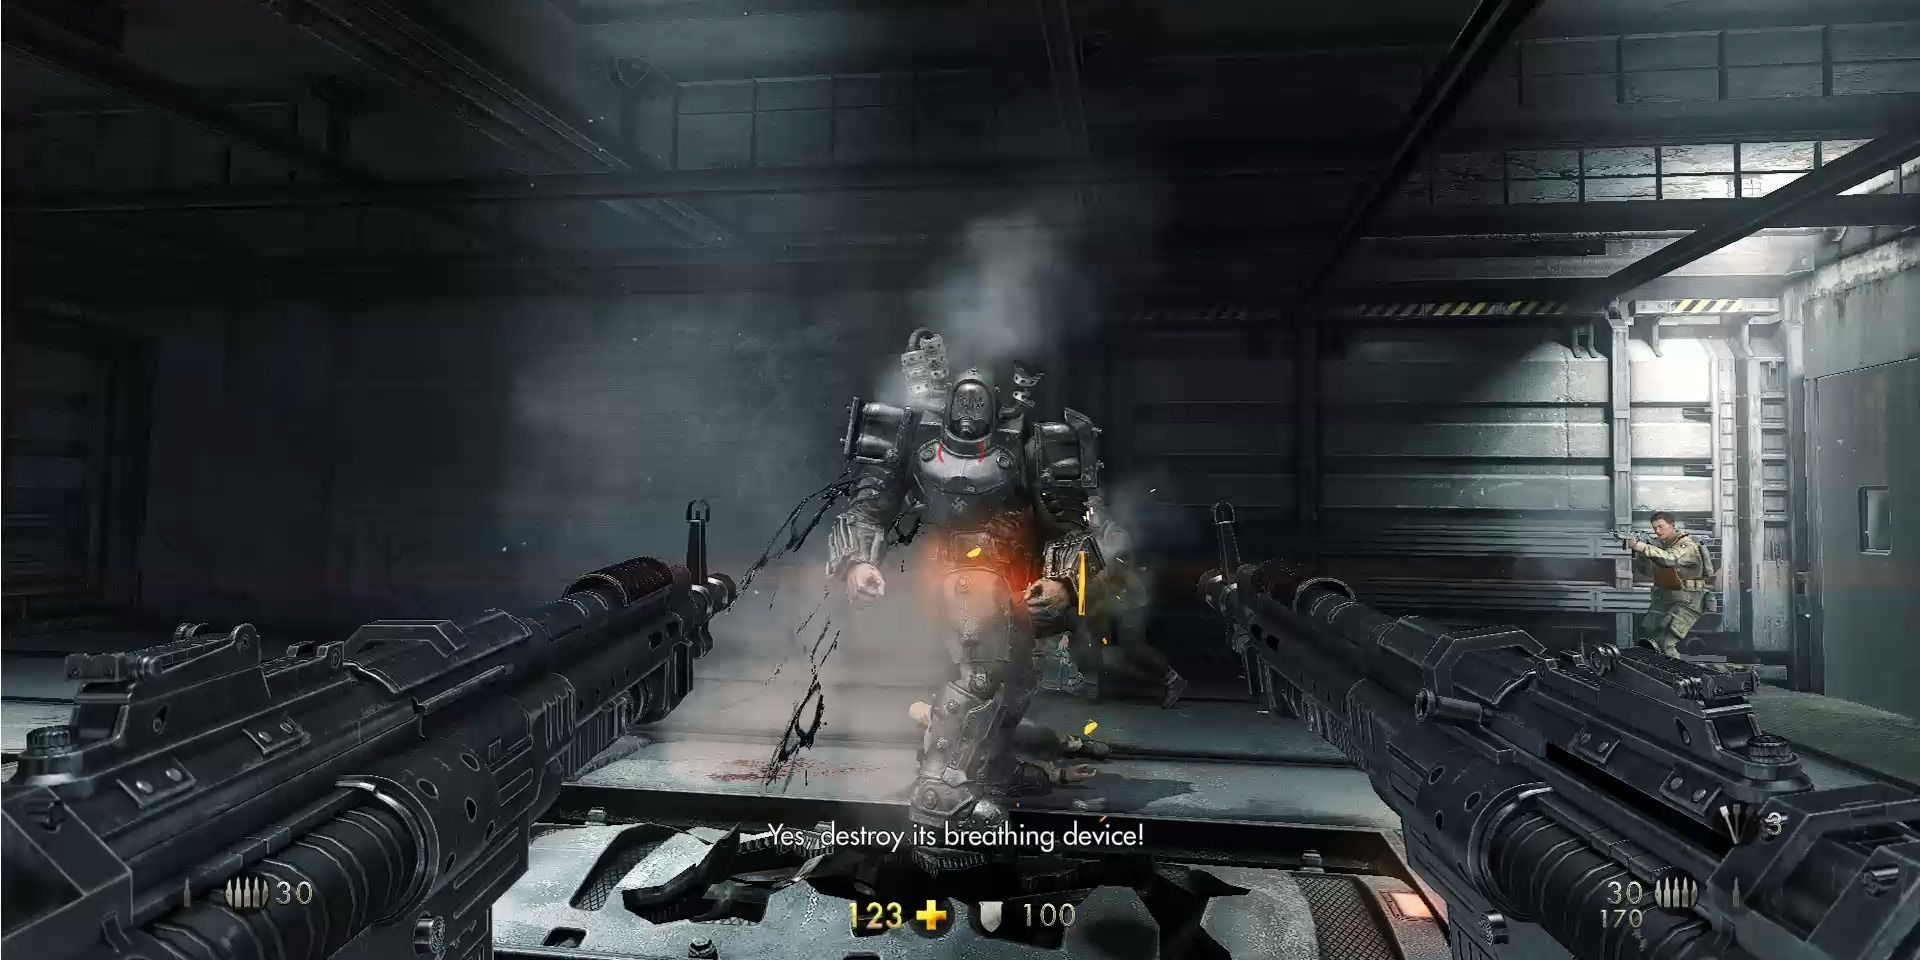 Image of the large enemy you must defeat in Wolfenstein: The New Order.